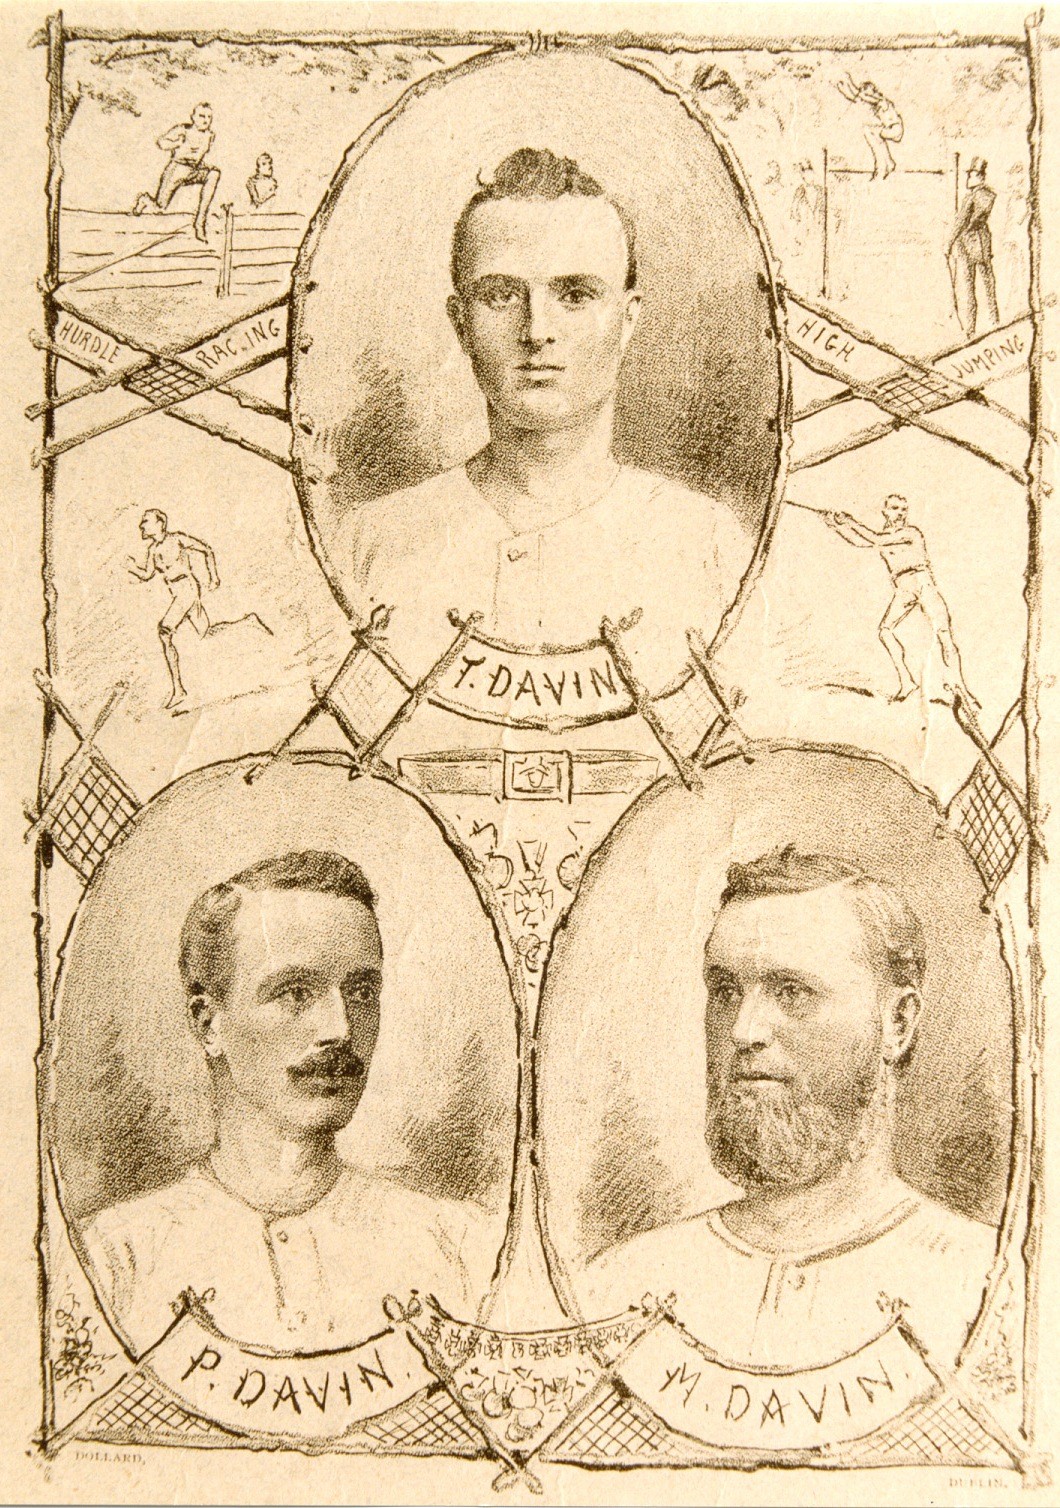 The Davin Brothers: three of the best Irish athletes of all time, who won medals at almost every athletics event in Ireland in the 1880s.